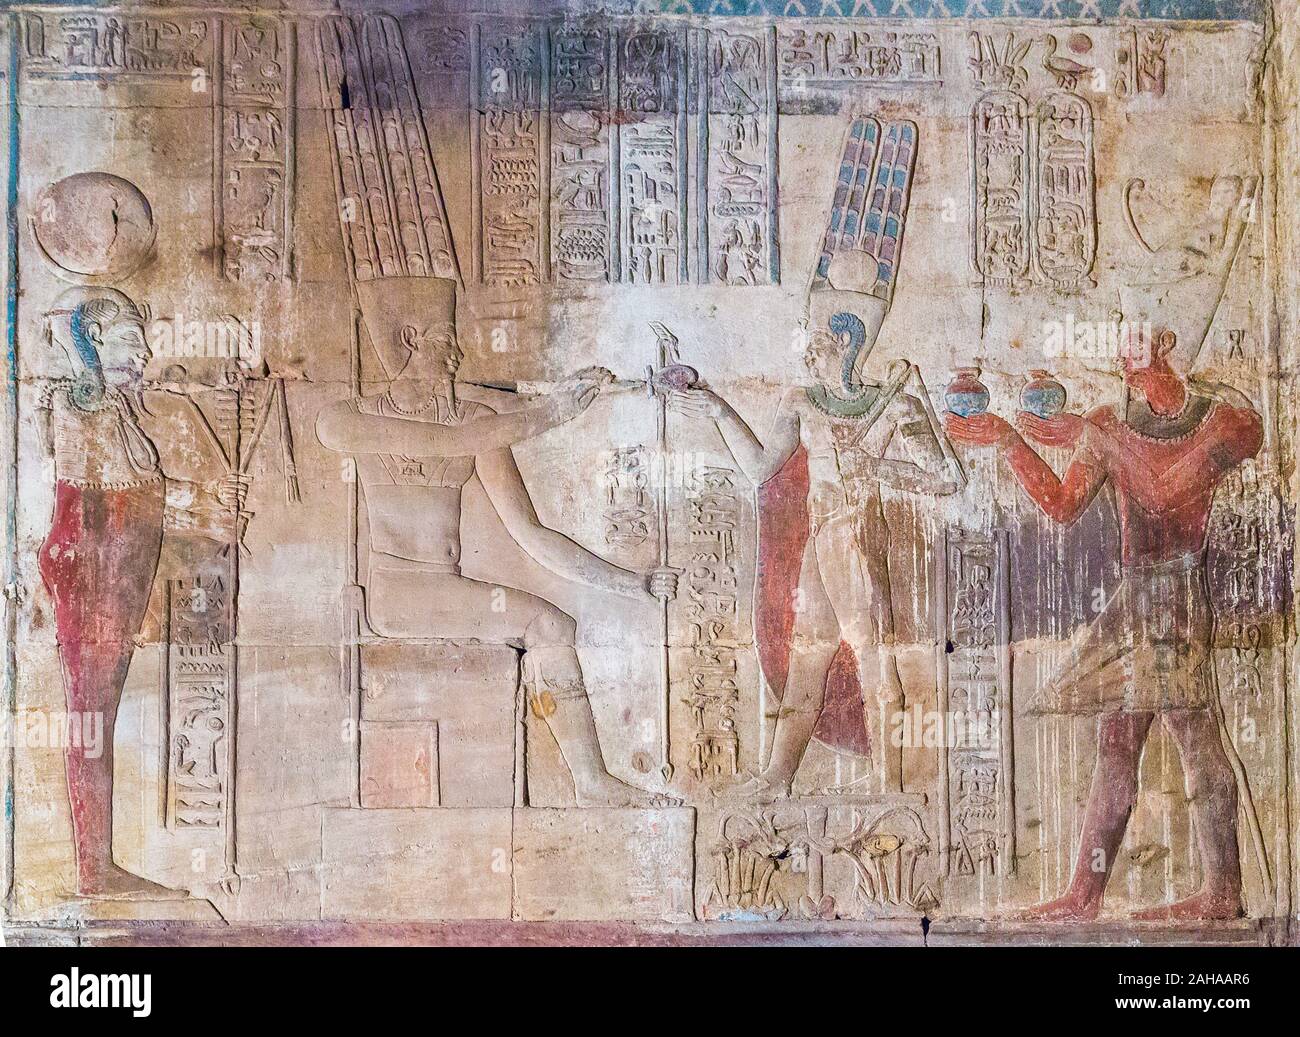 UNESCO World Heritage, Thebes in Egypt, Karnak site, ptolemaic temple of Opet. The king offers Nou vase (wine) to gods Amun-Ra and Khonsu. Stock Photo